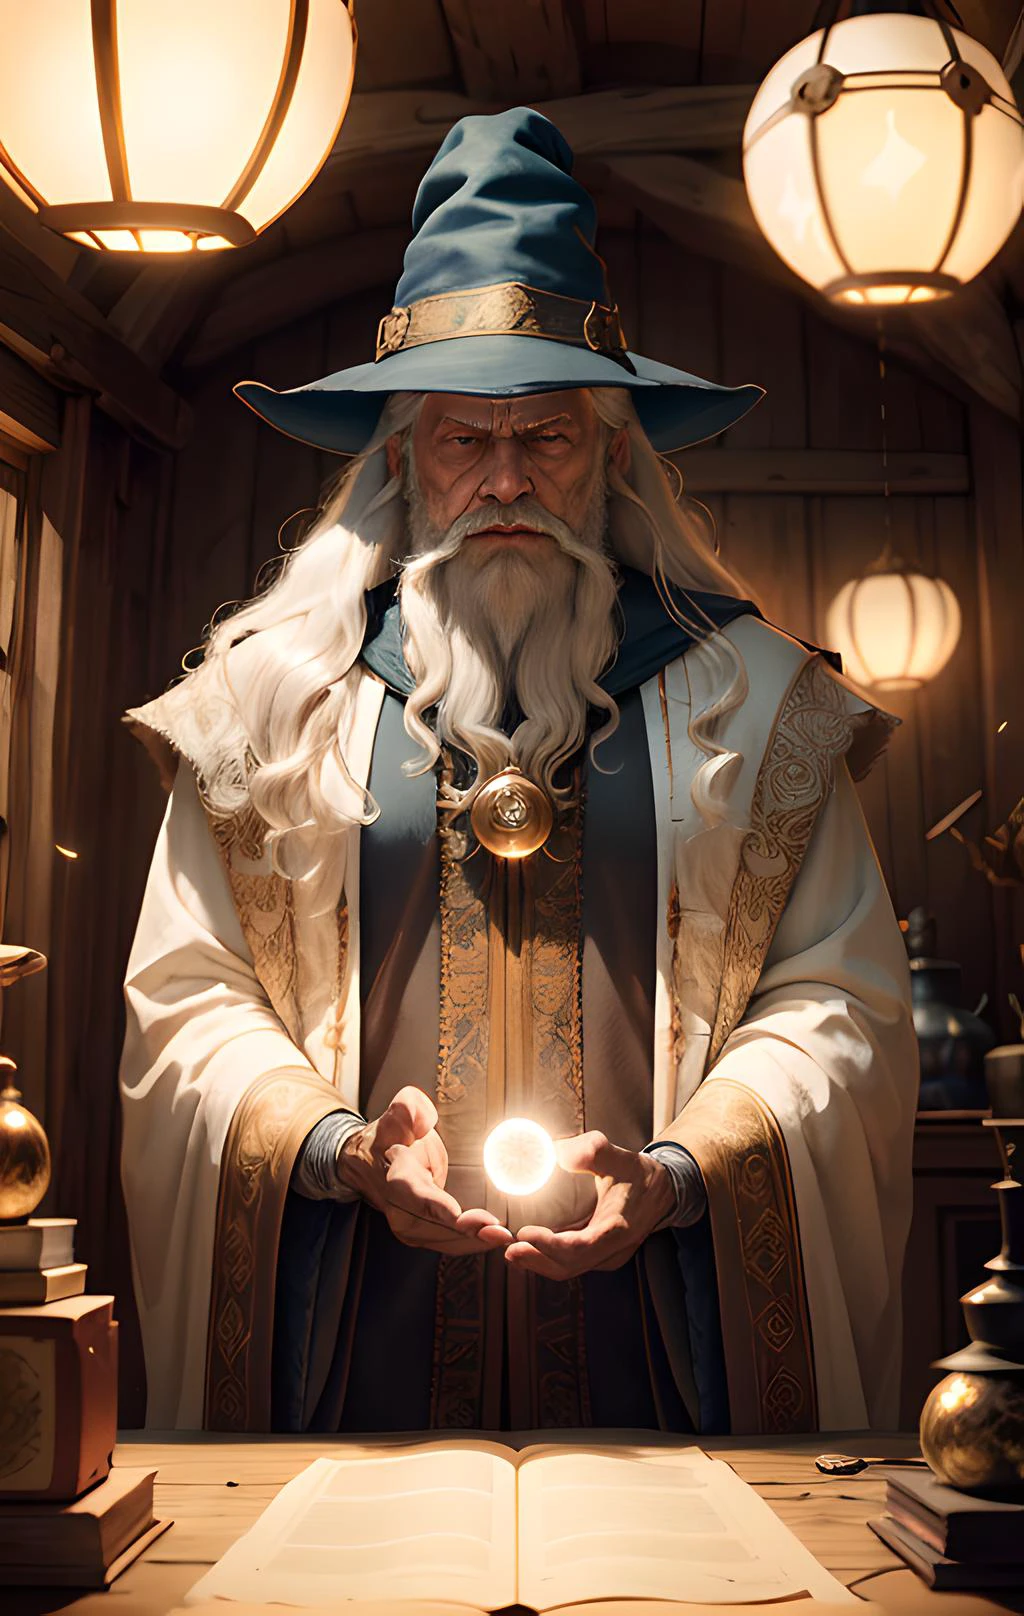 (Masterpiece:1.2), (Best Quality), Detailed, UHD, Cinematic Lighting, sharp focus, (illustration:1.1), intricate, Old Wizard with long white hair and beard, wearing a wizard's robe and hat, pondering a glowing orb, in a dimly lit room, magician's room, glowing lights, flickering lights,